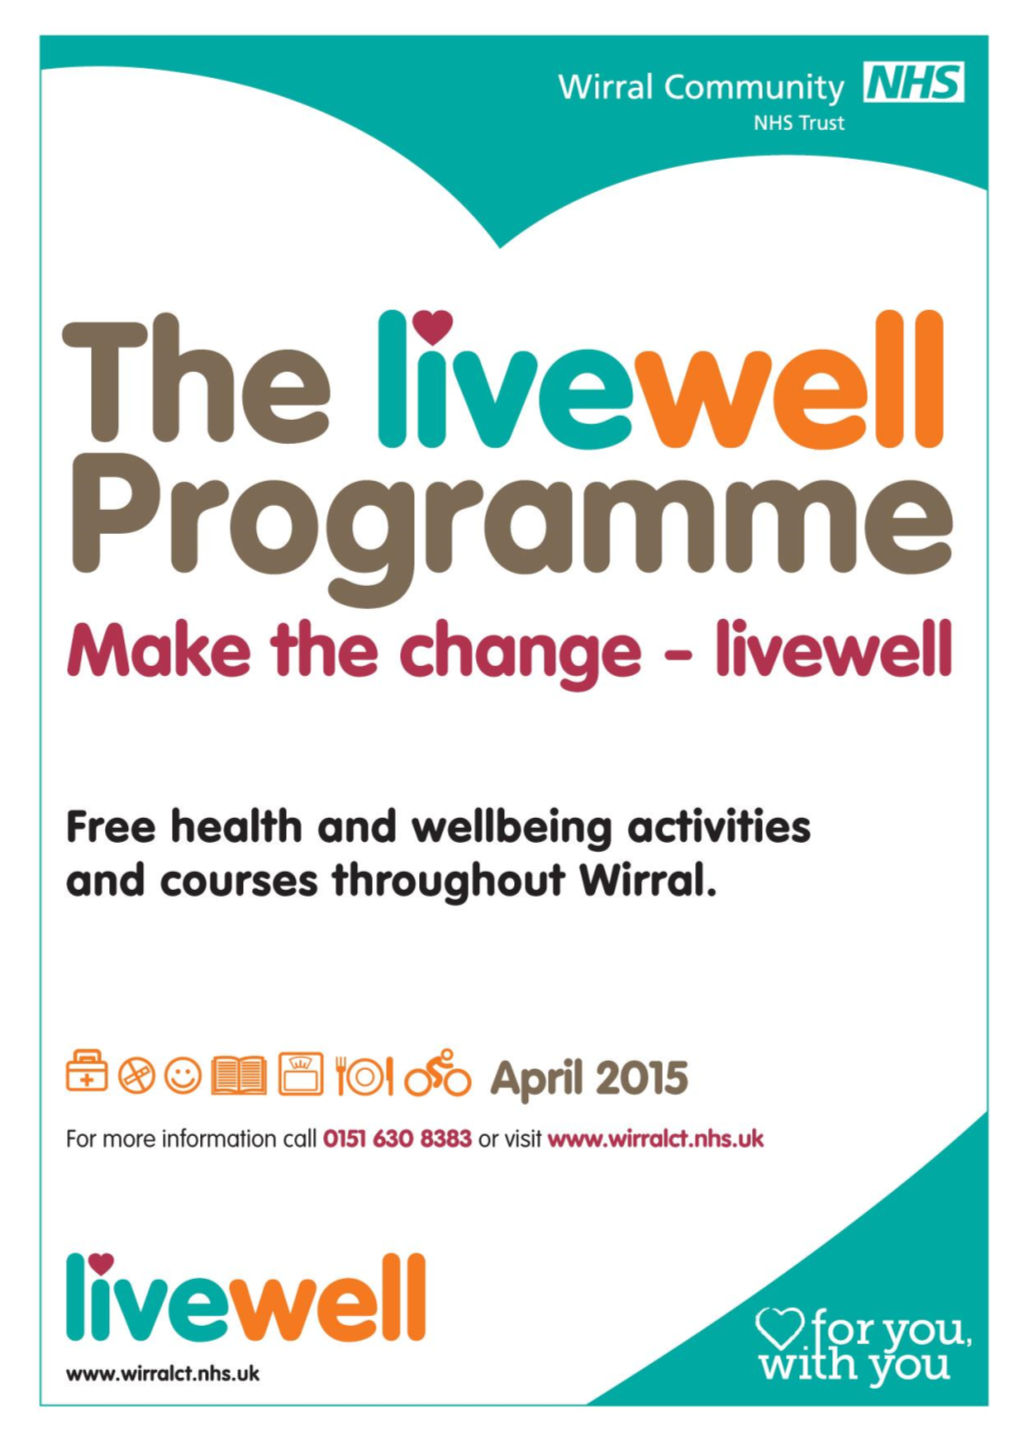 About the Livewell Programme